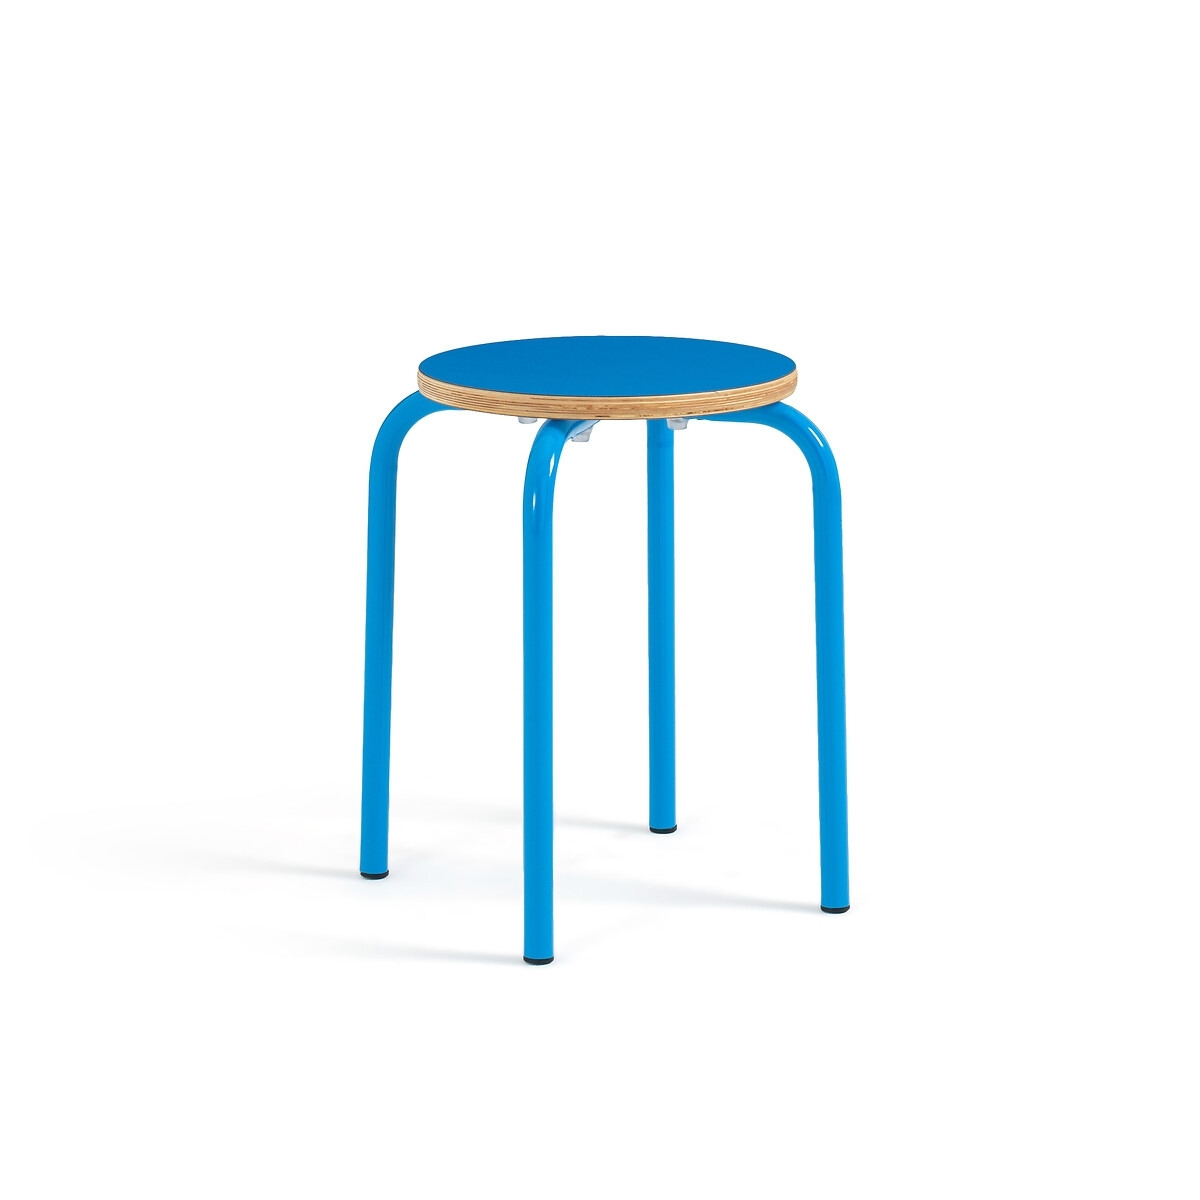 Hiba Low Stackable Steel and Wood Stool - image 1